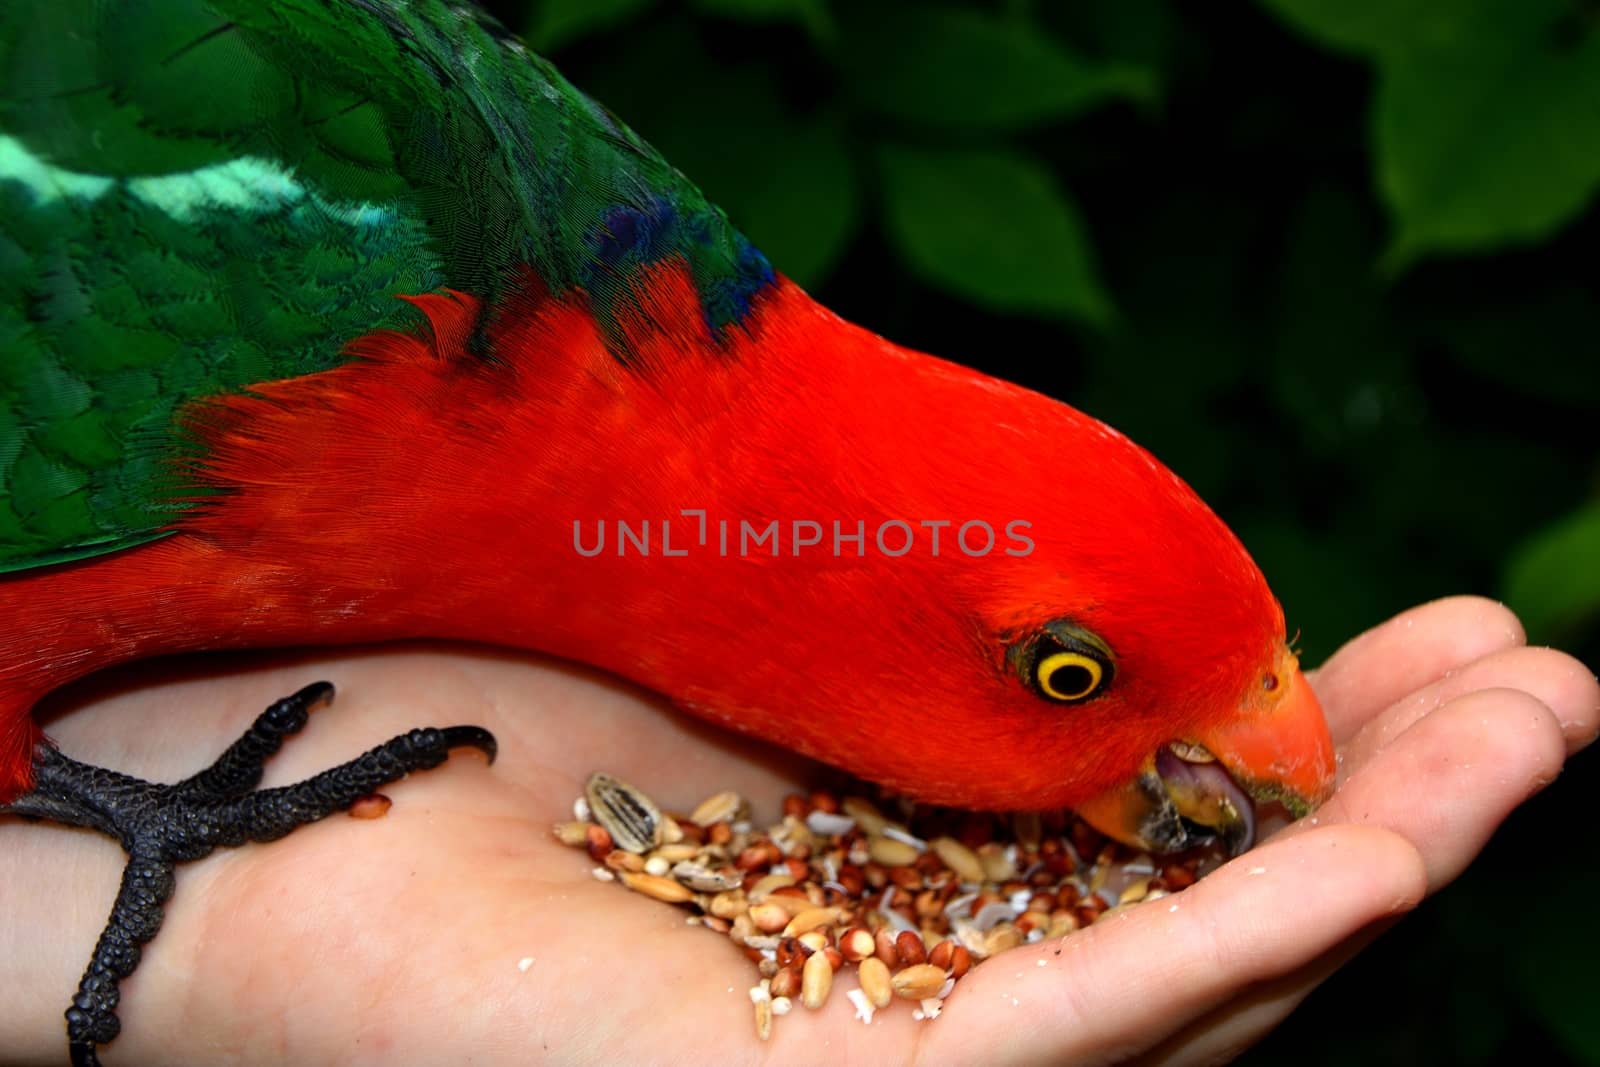 Hand feeding seeds to a male King Parrot